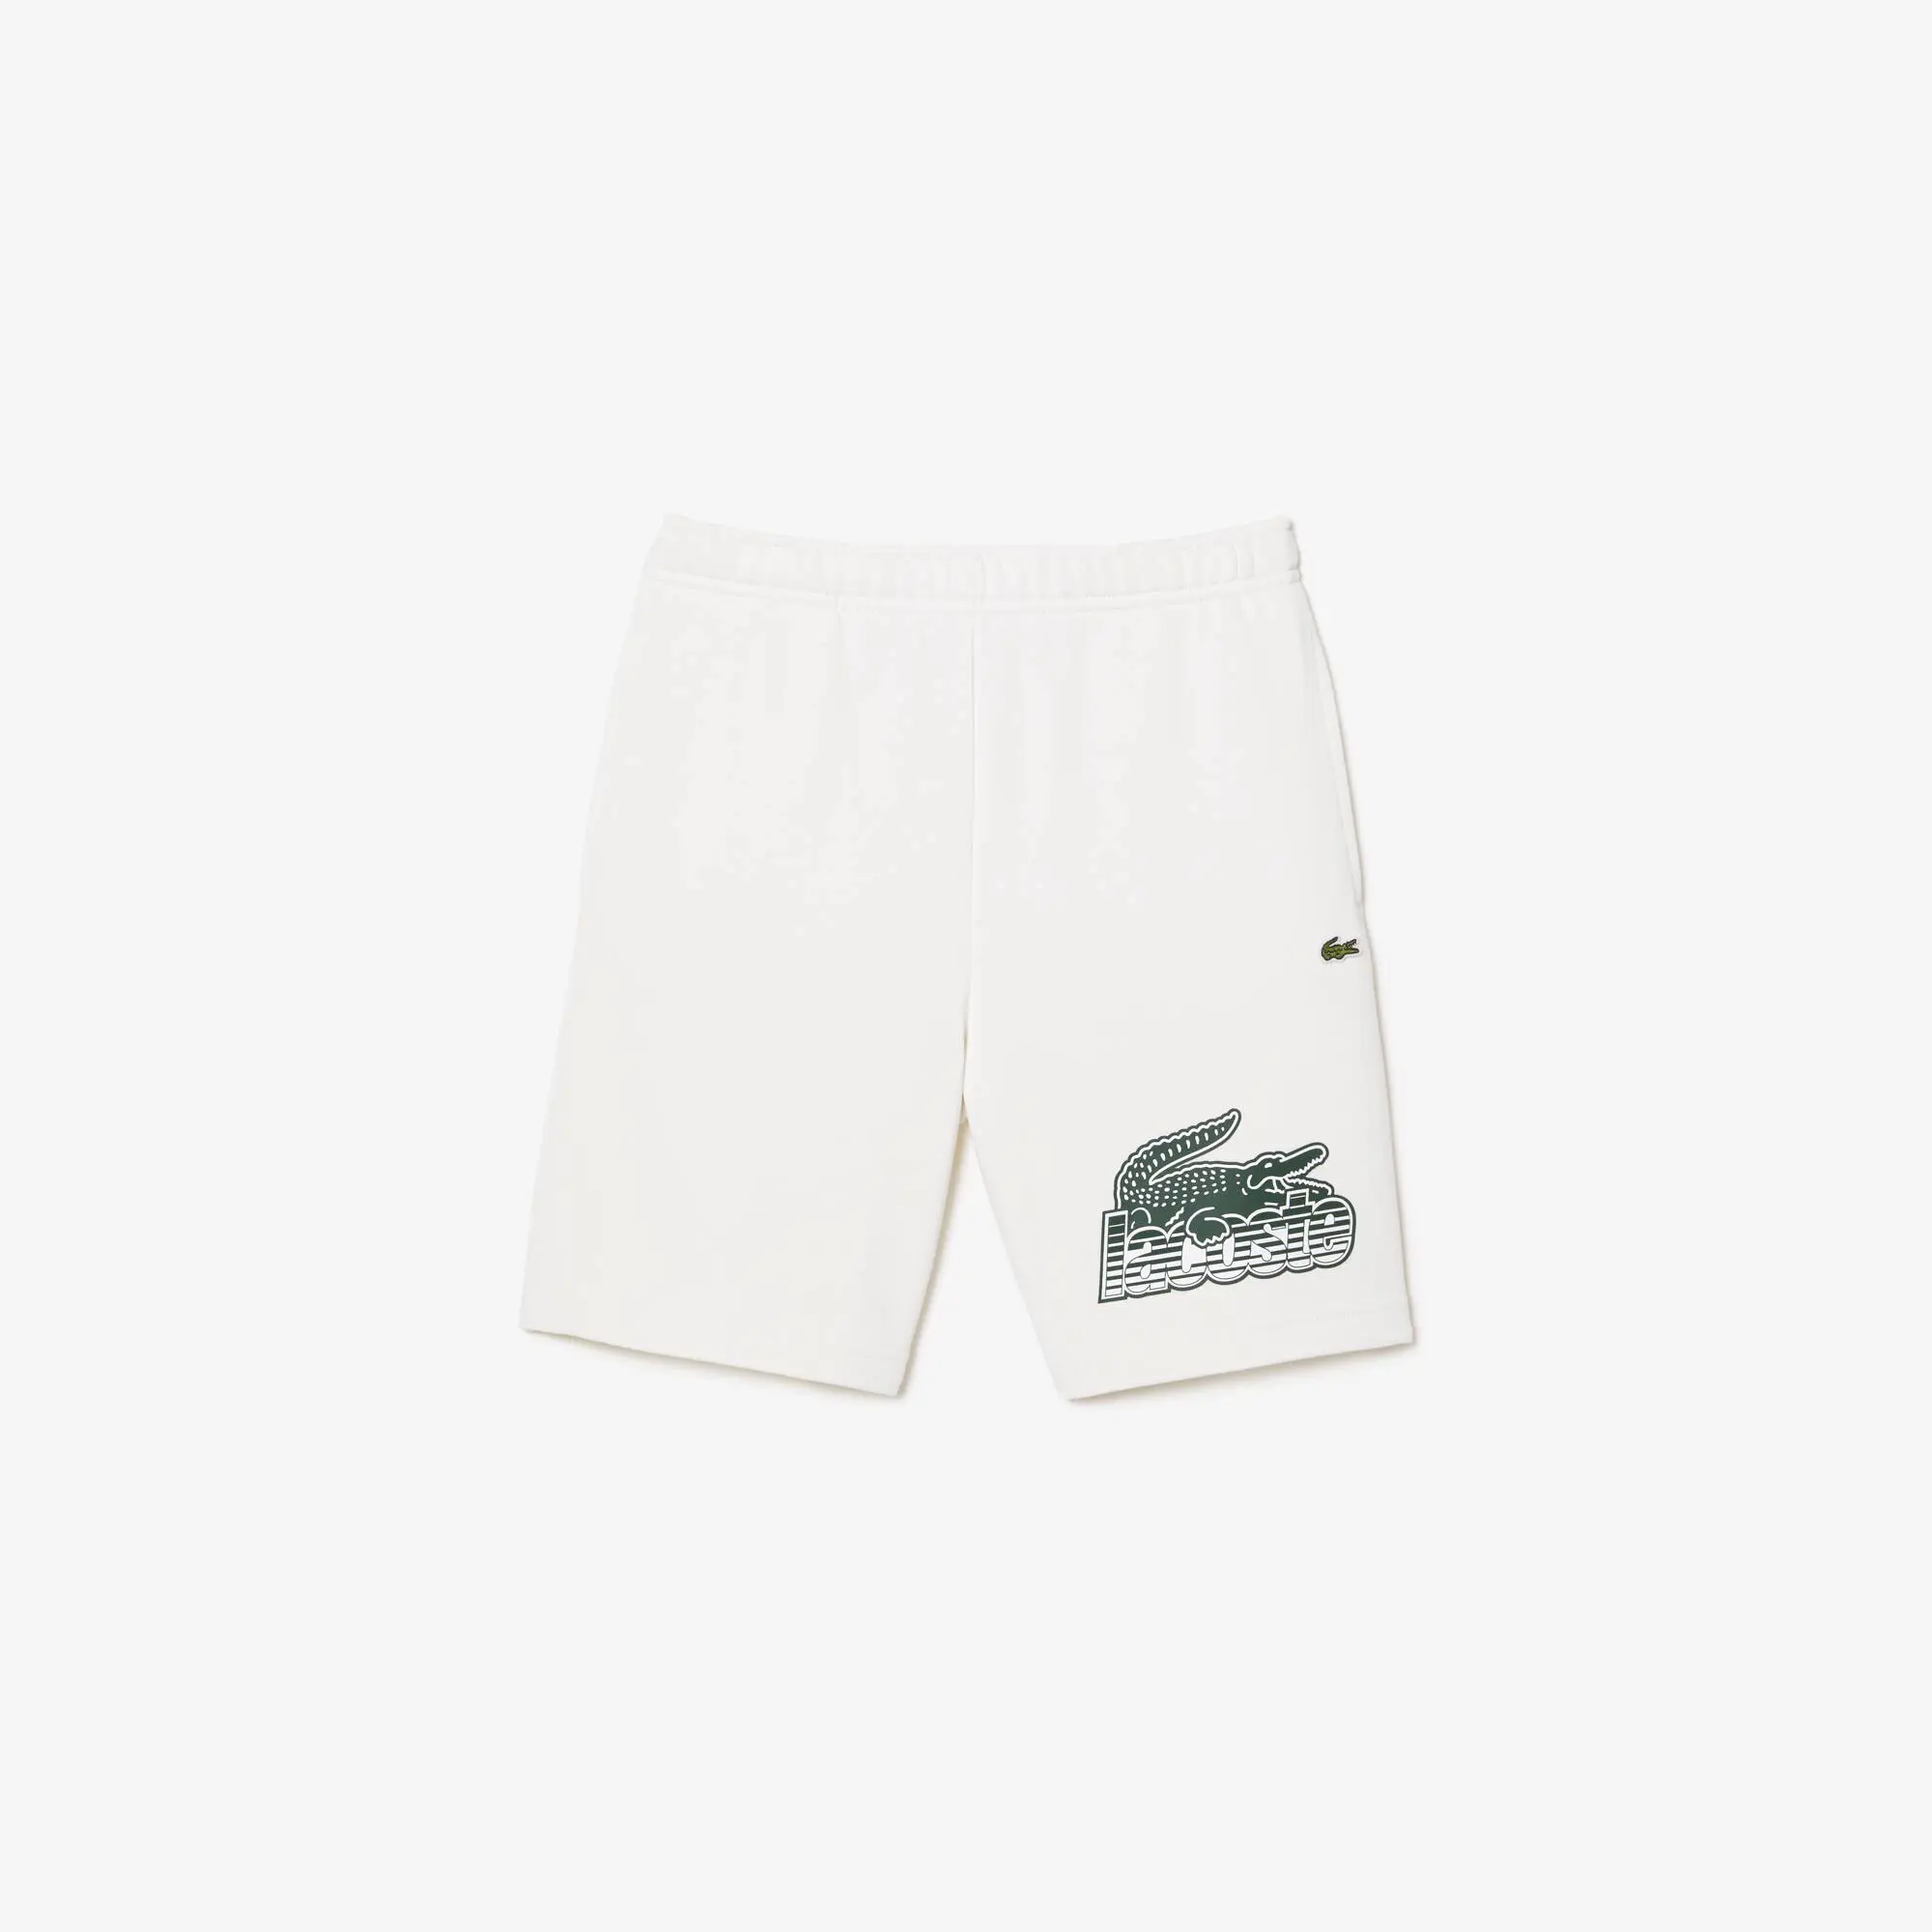 Lacoste Boys’ Lacoste Contrast Print Branded Shorts. 2